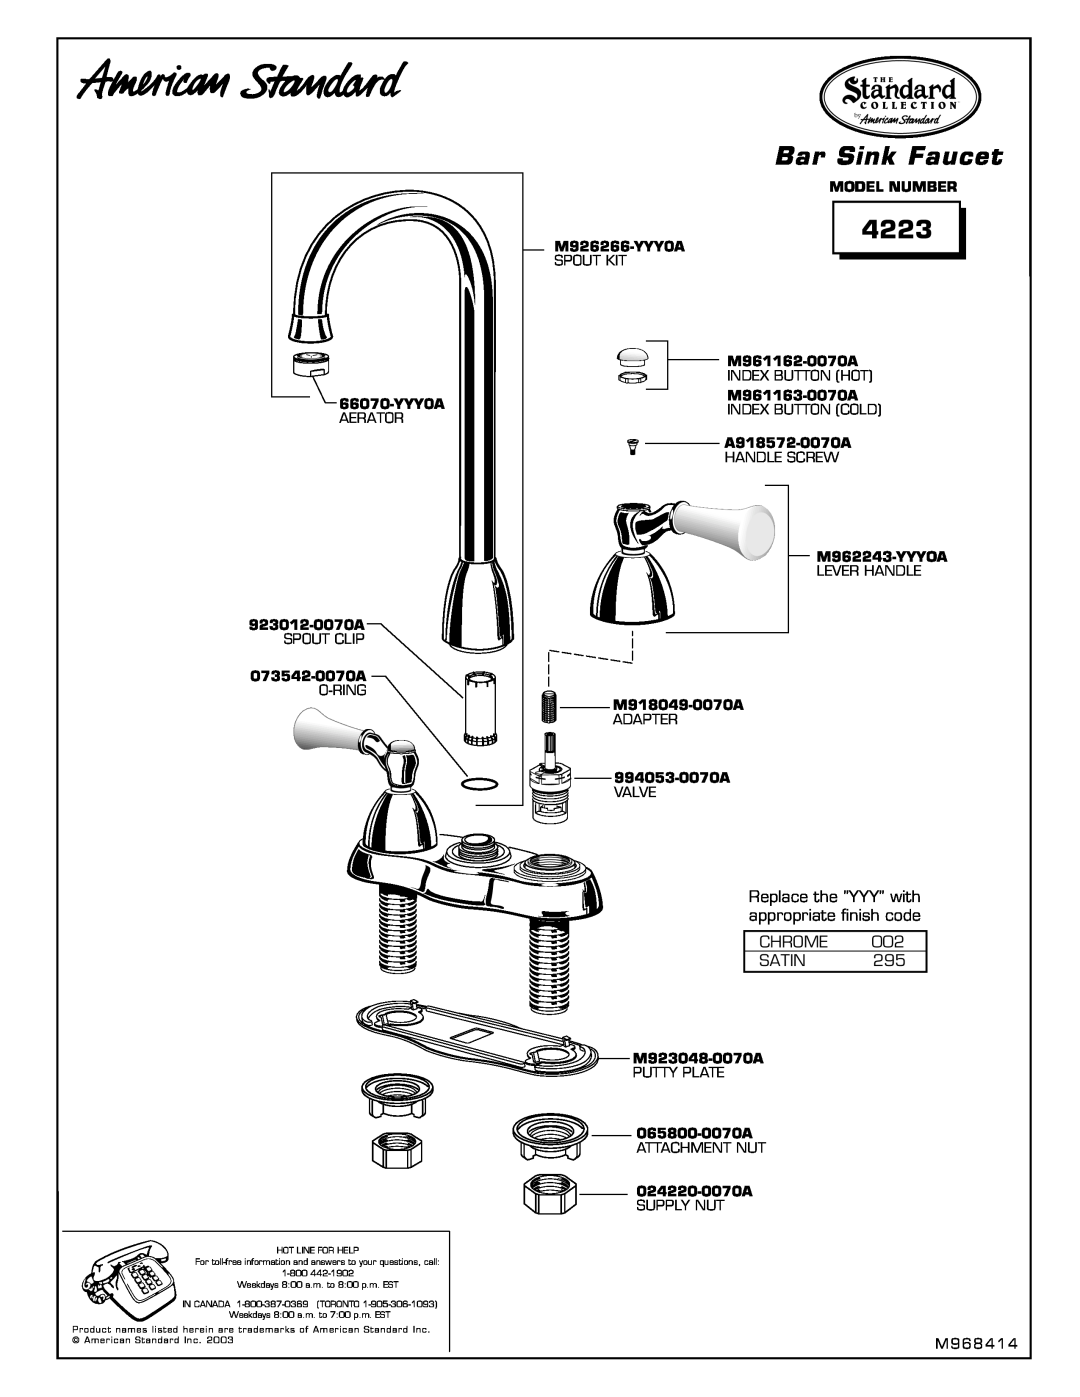 American Standard M968414 manual Bar Sink Faucet, 4223, Replace the YYY with appropriate finish code, Chrome Satin 